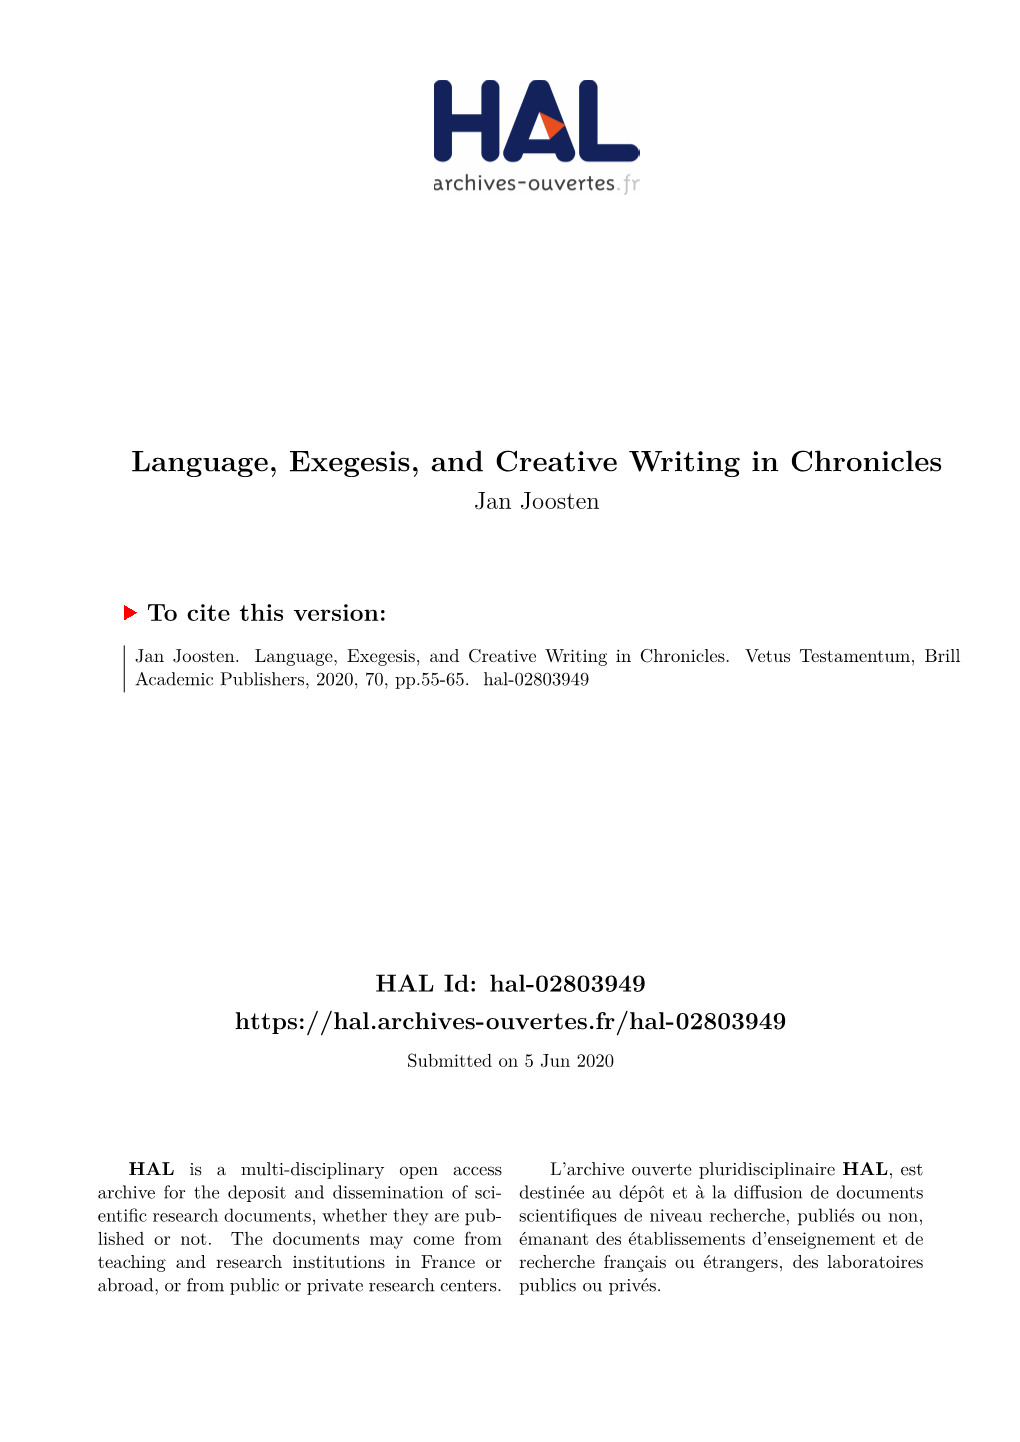 Language, Exegesis, and Creative Writing in Chronicles Jan Joosten